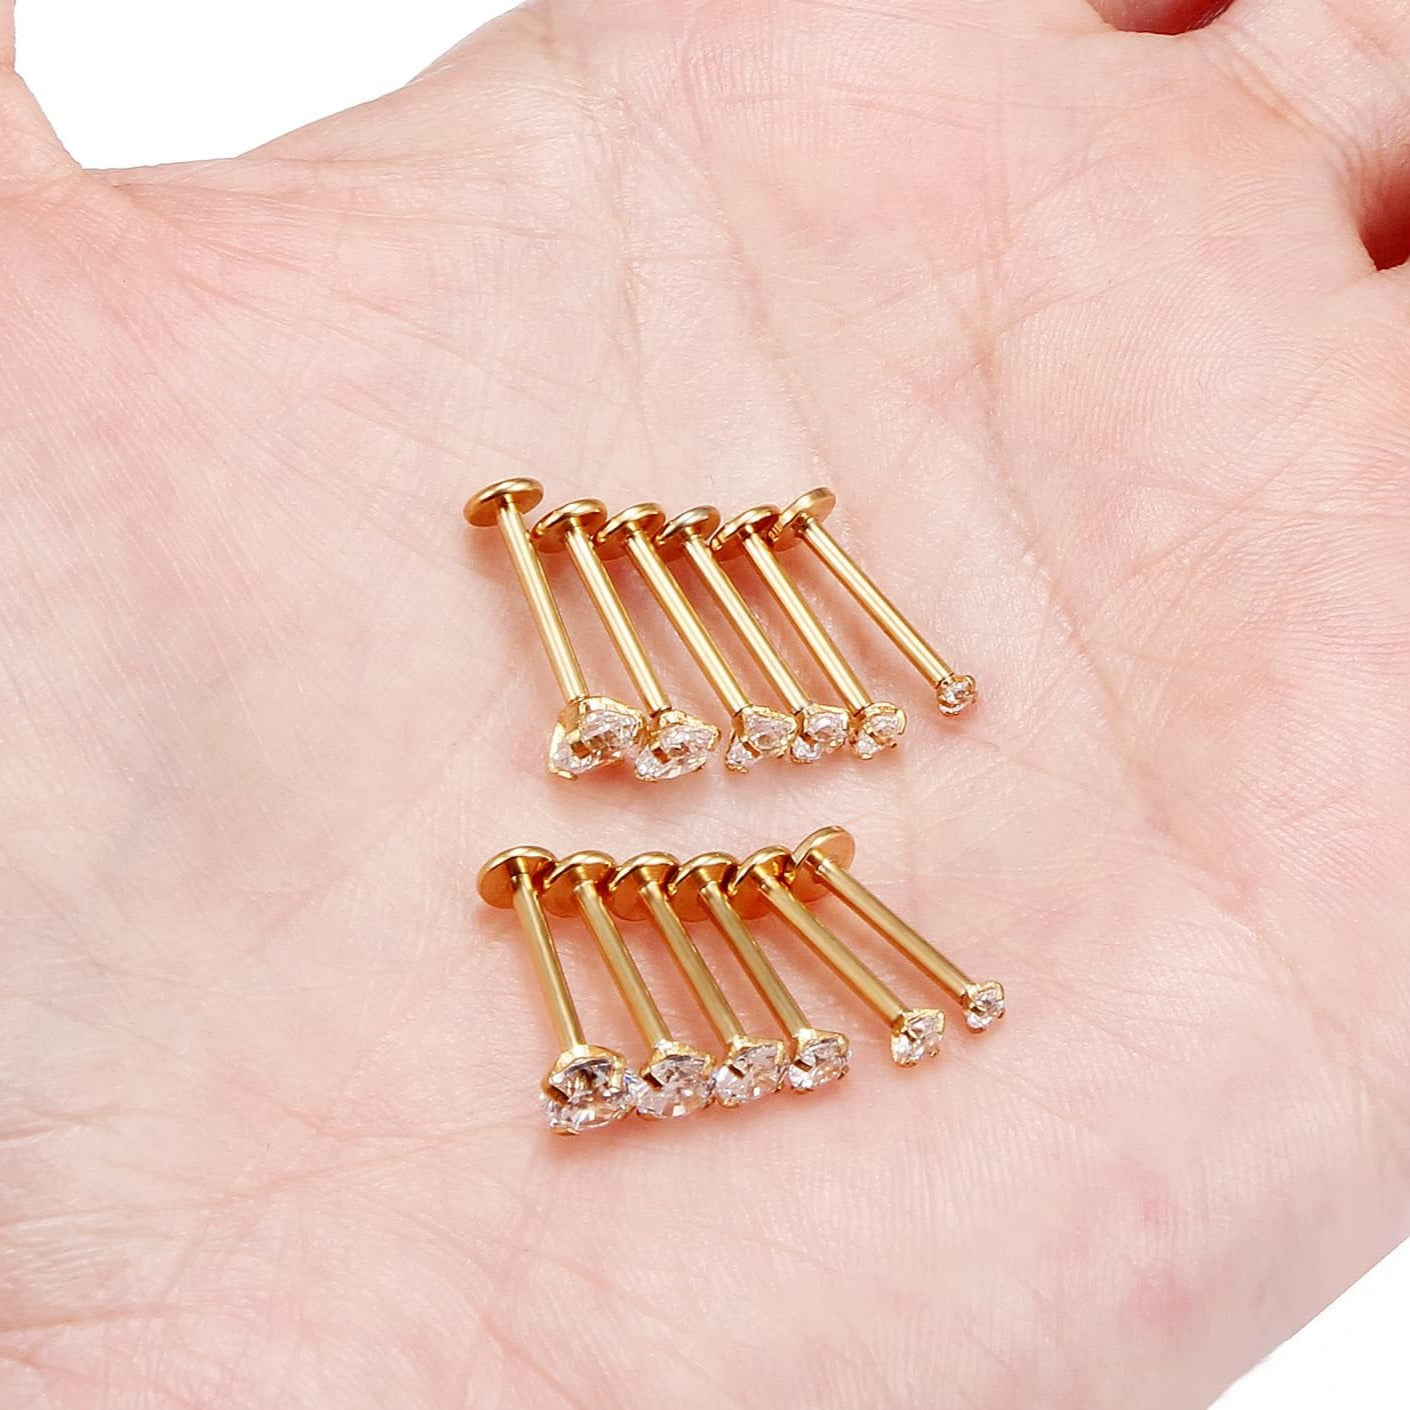 20G Gold Ion Plated Threadless Push CZ Prong Set Tragus Labret